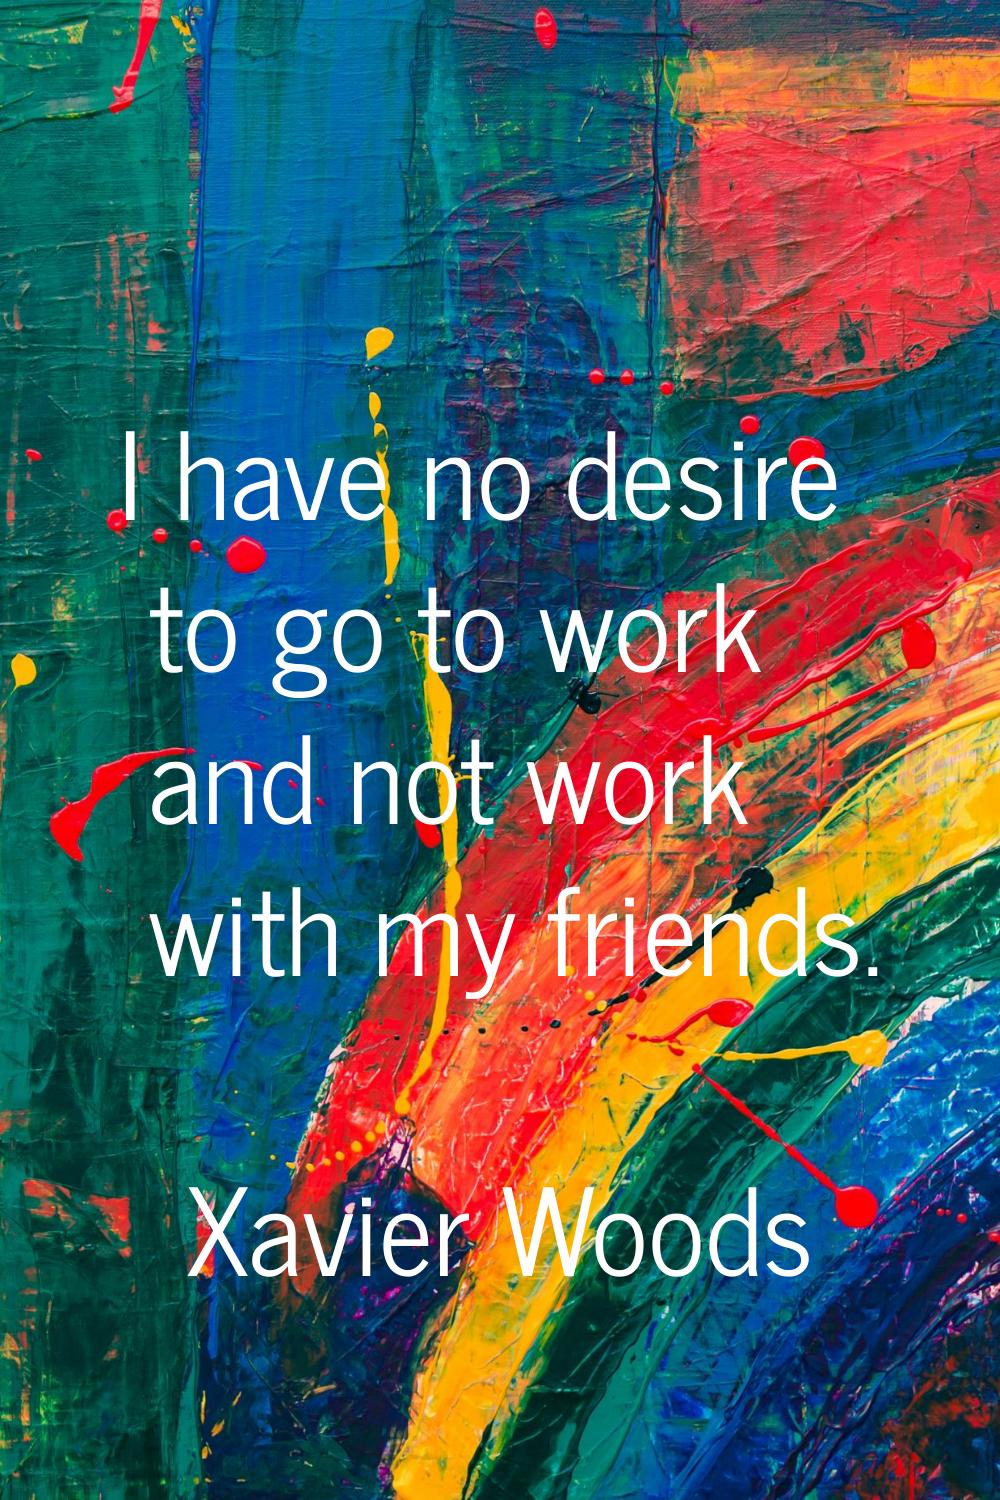 I have no desire to go to work and not work with my friends.